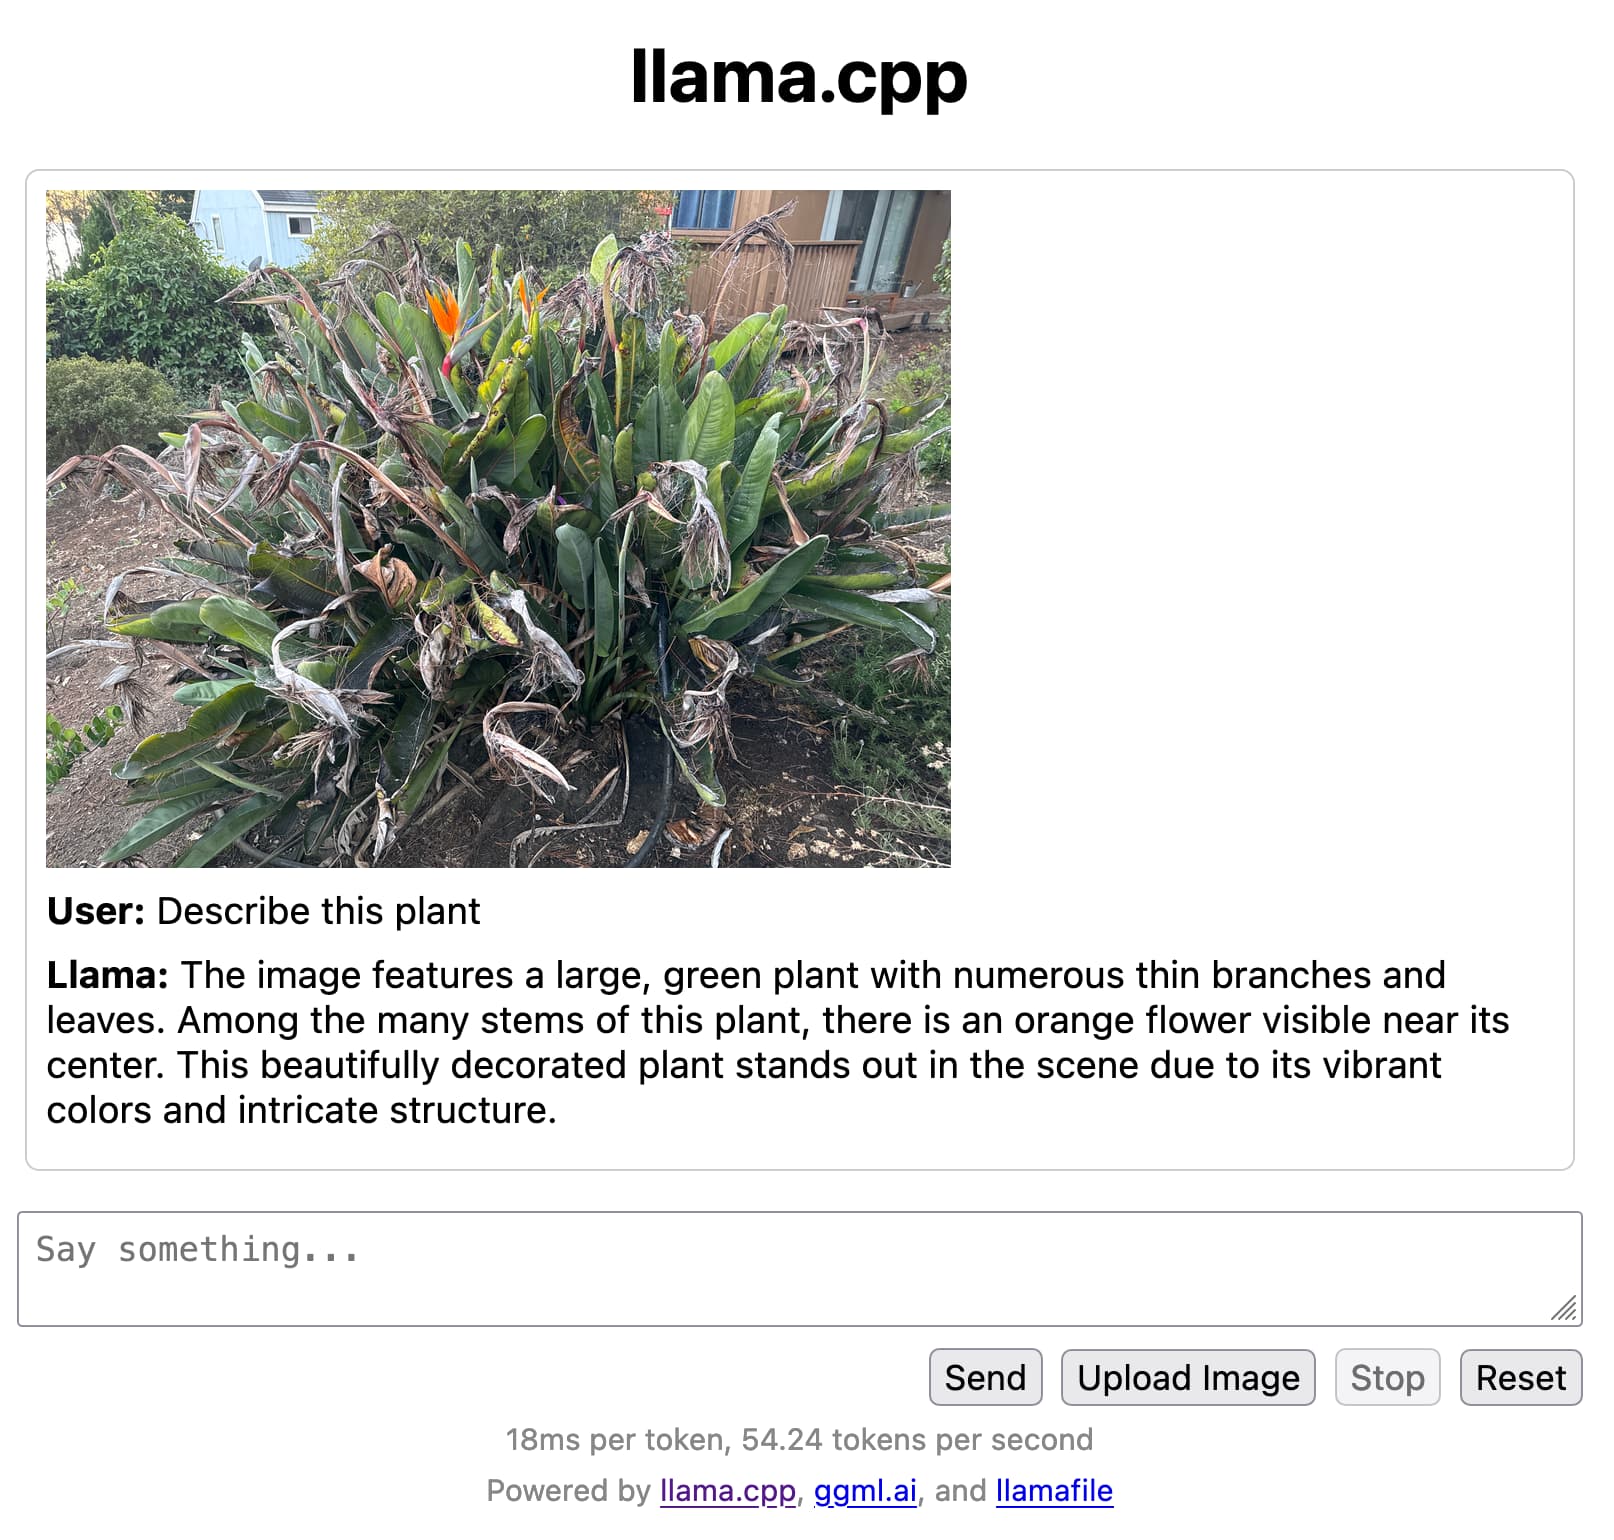 Screenshot. llama.cpp - then a photo I took of a plant  User: Describe this plant  Llama: The image features a large, green plant with numerous thin branches and leaves. Among the many stems of this plant, there is an orange flower visible near its center. This beautifully decorated plant stands out in the scene due to its vibrant colors and intricate structure.  18ms per token, 54.24 tokens per second Powered by llama.cpp, ggml.ai, and llamafile